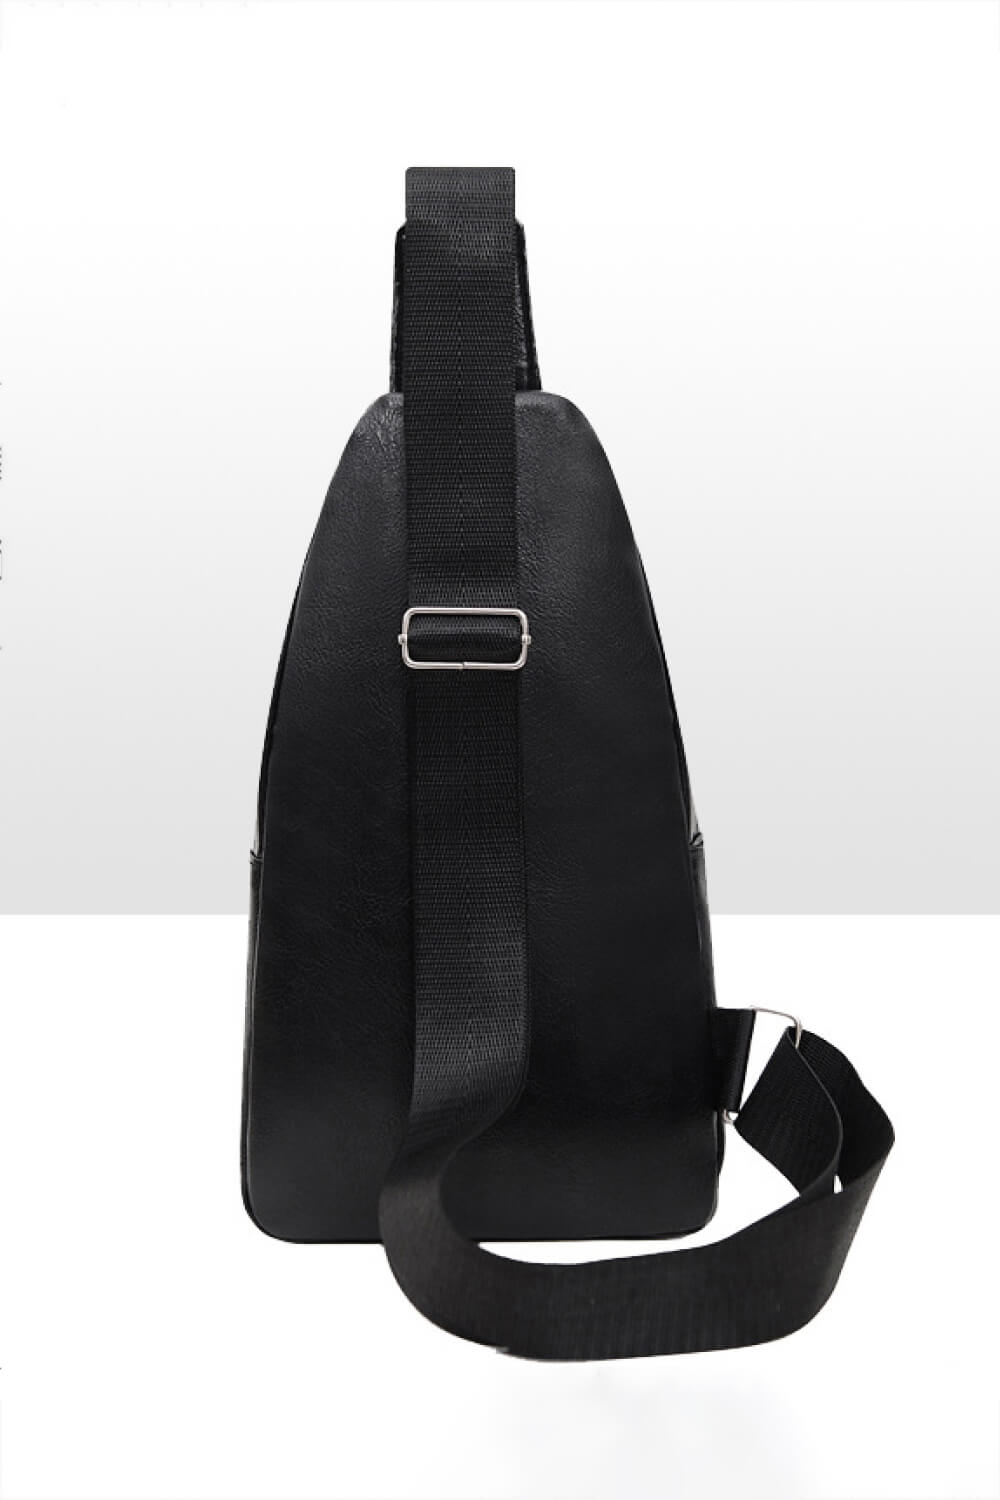 Large Capacity Sling Bag with USB Design